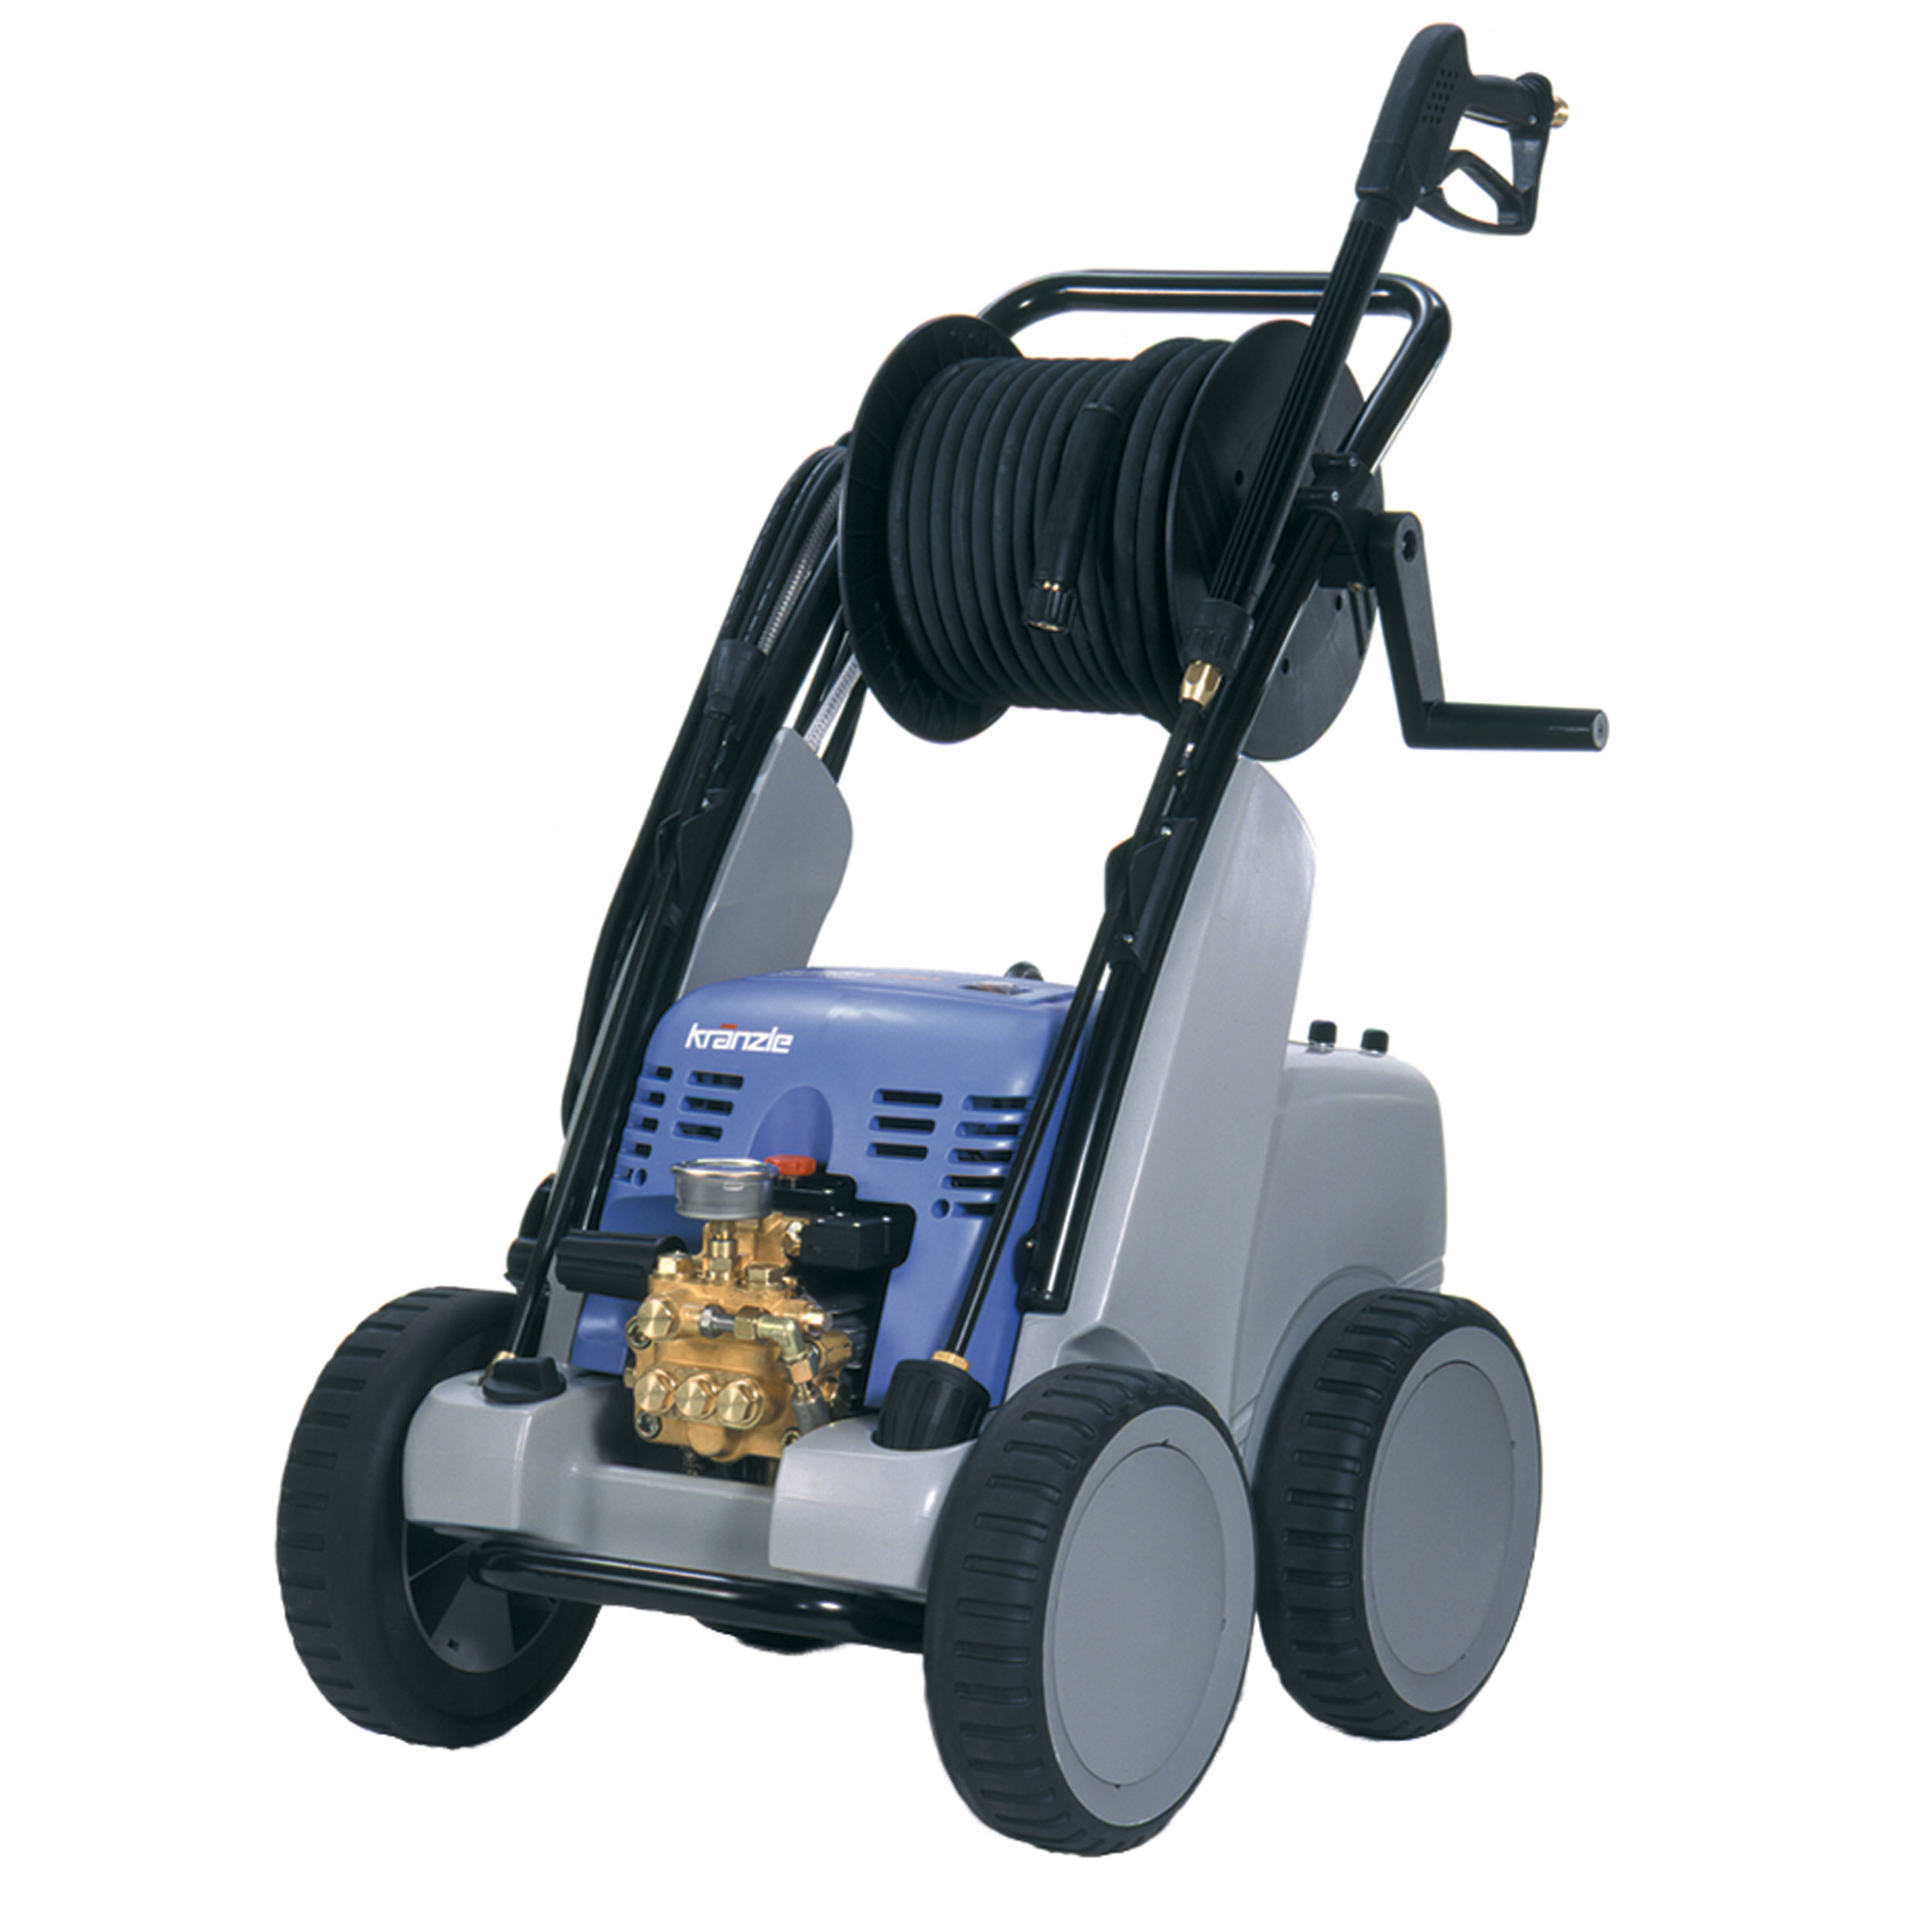 K1200tst Pressure Washer, Cold Water, 220v 25a, 3ph